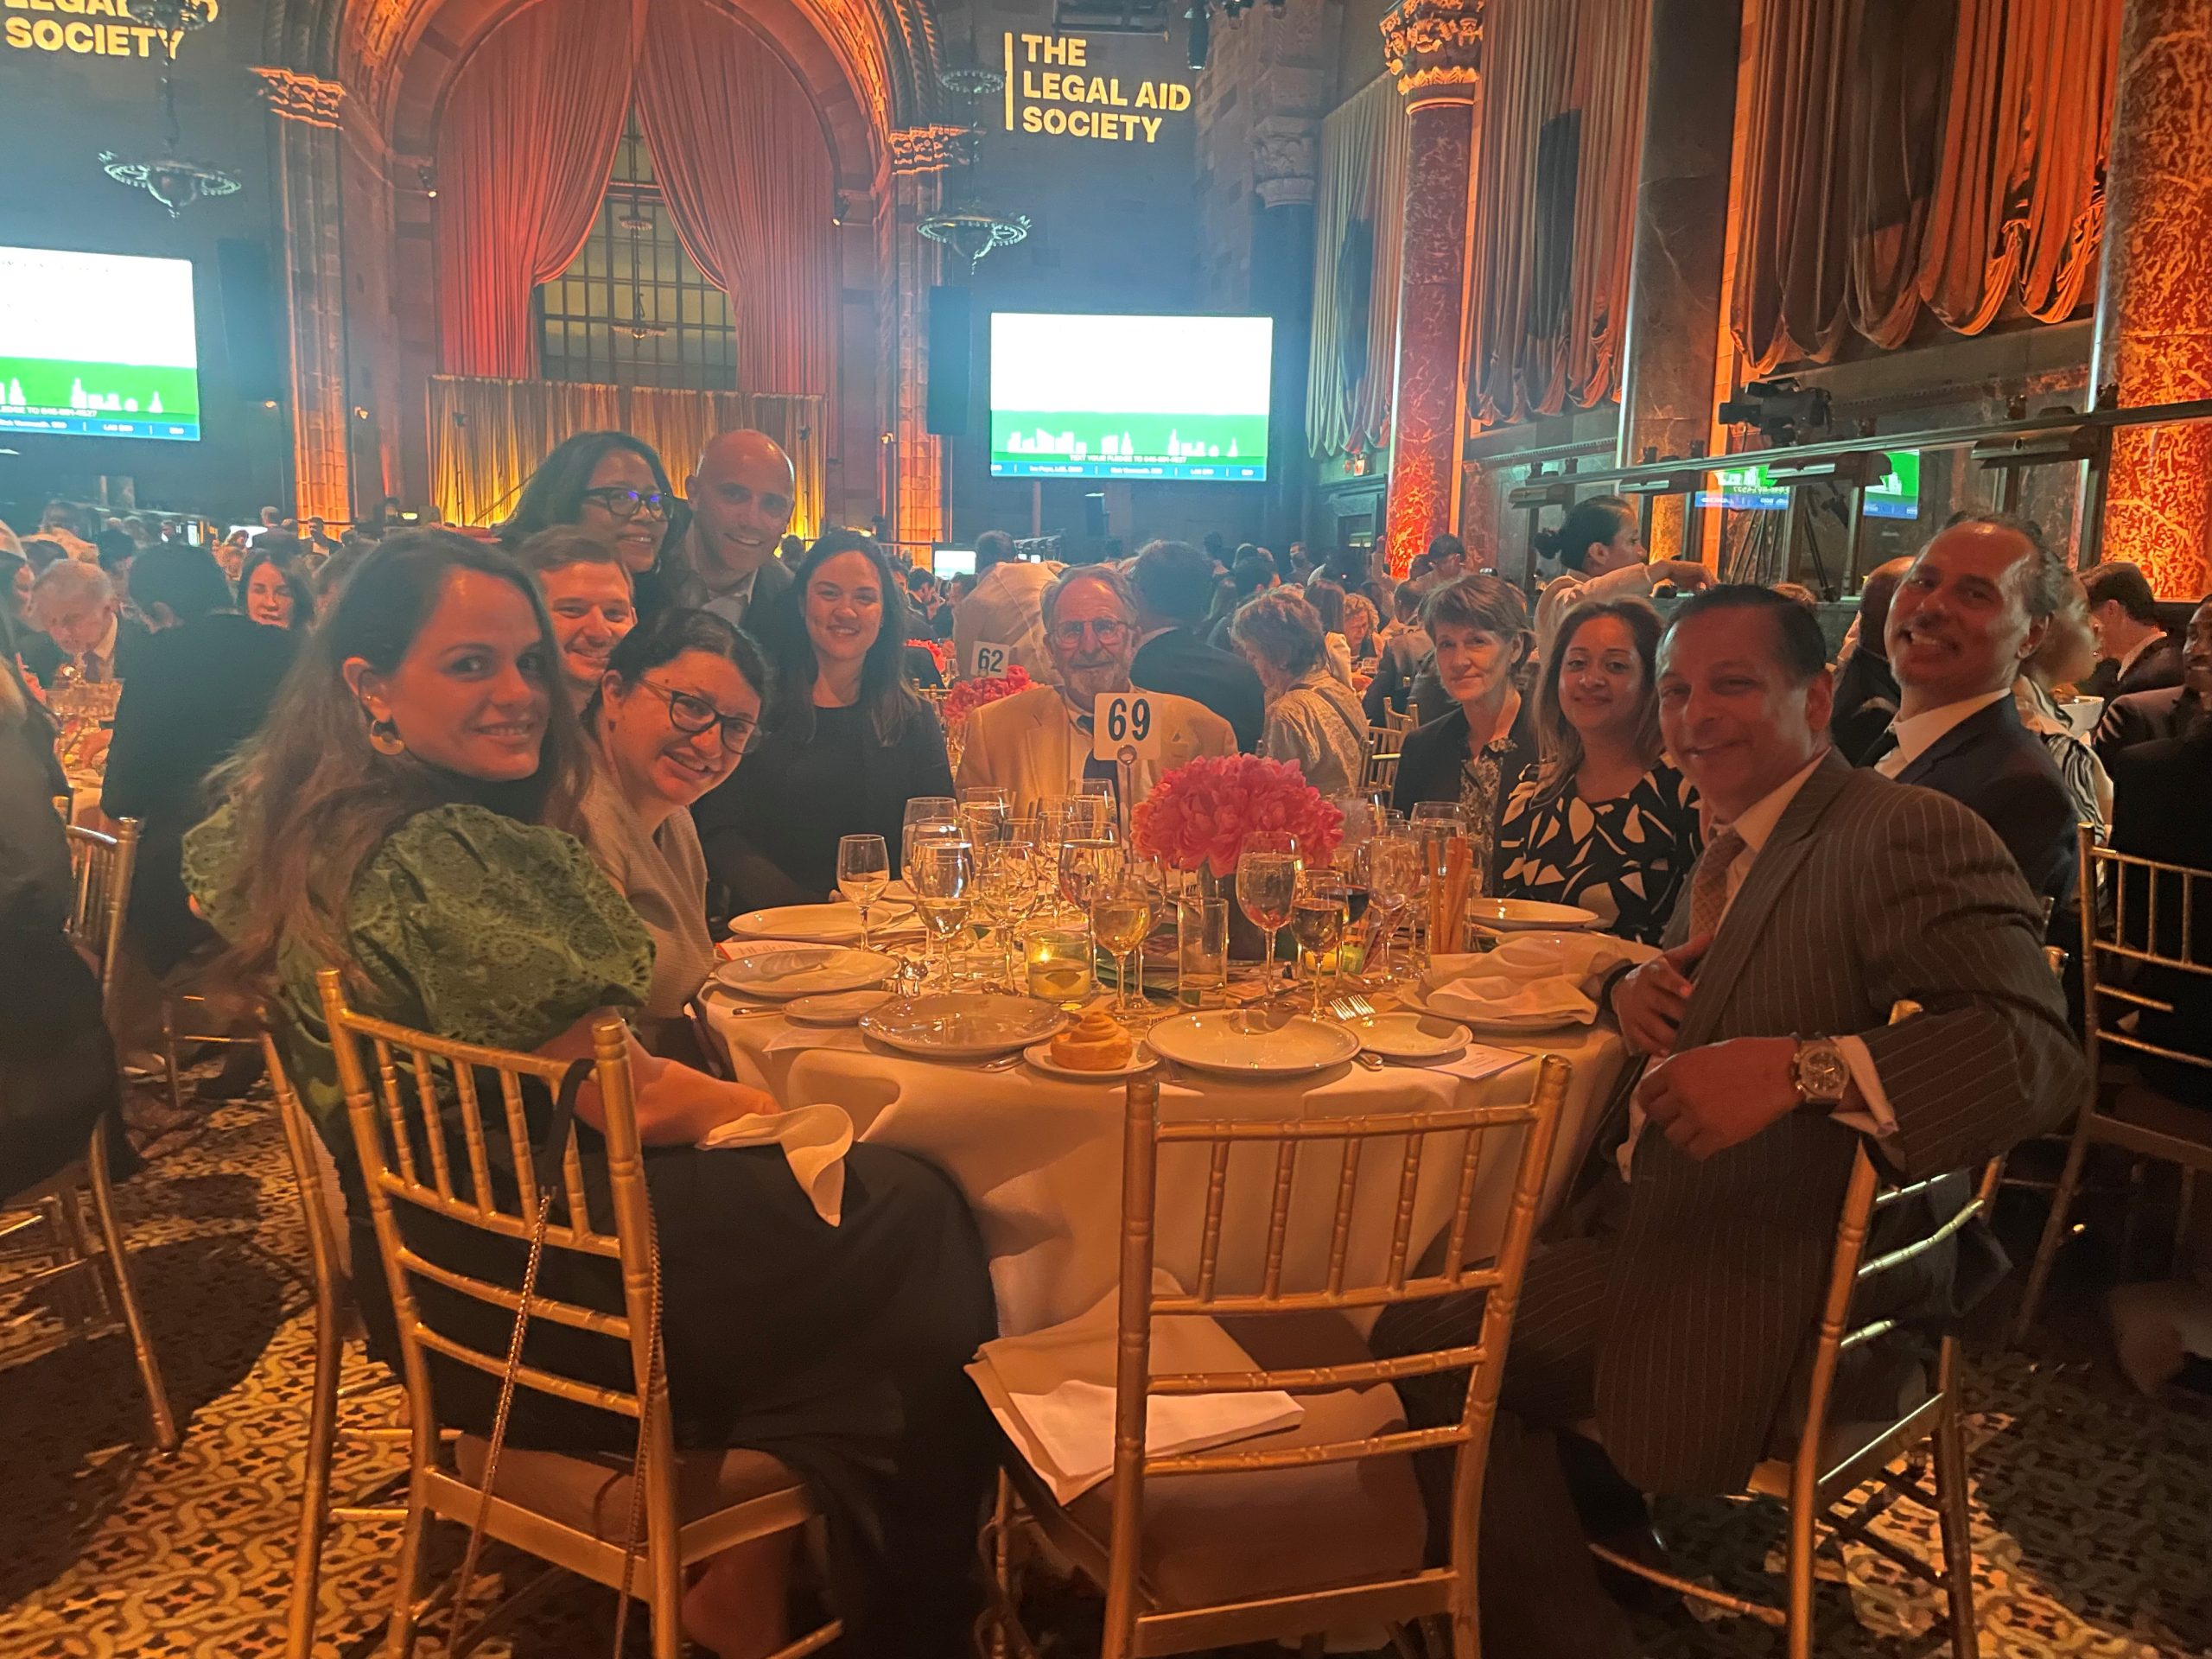 Ty Hyderally participated in the NY Legal Aid Association Benefit Dinner at Cipriano